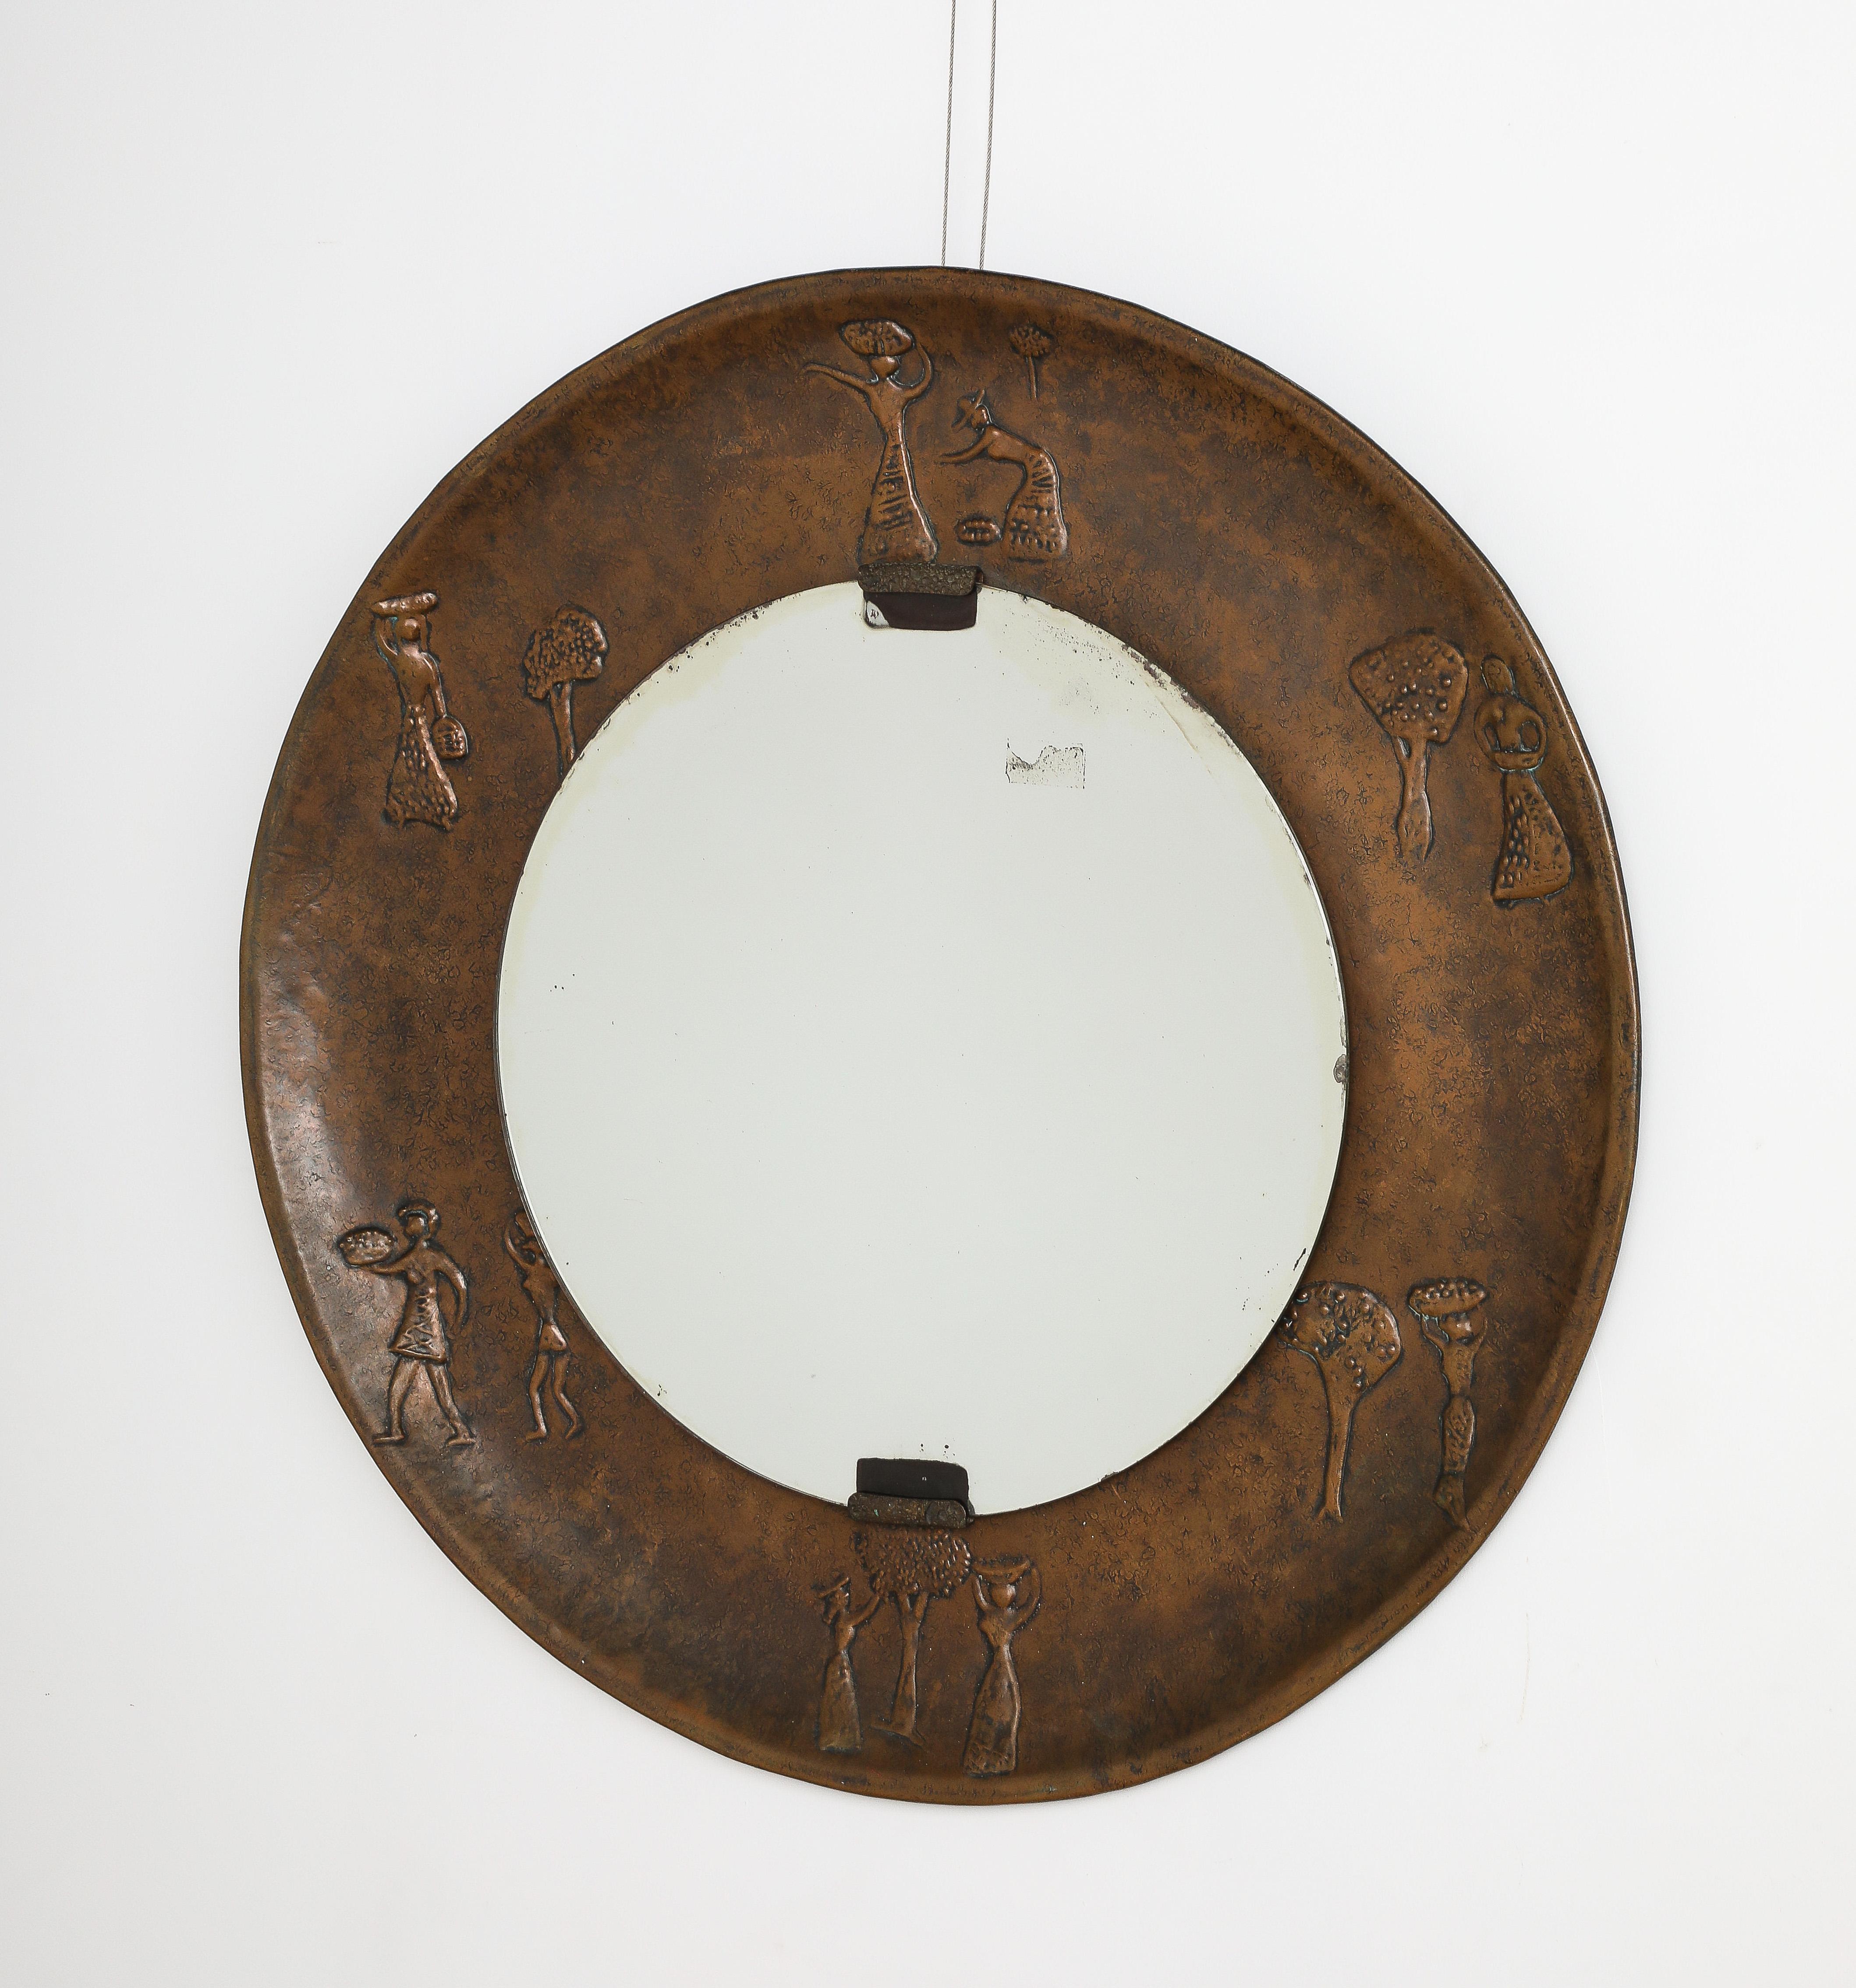 Angelo Bragalini Copper Wall Mirror with Etruscan Motif, Italy, circa 1960
A stunning copper embossed circular wide frame depicting Etruscan figures in relief.  The figures are seen depicting daily life of harvesting. The copper frame supports a